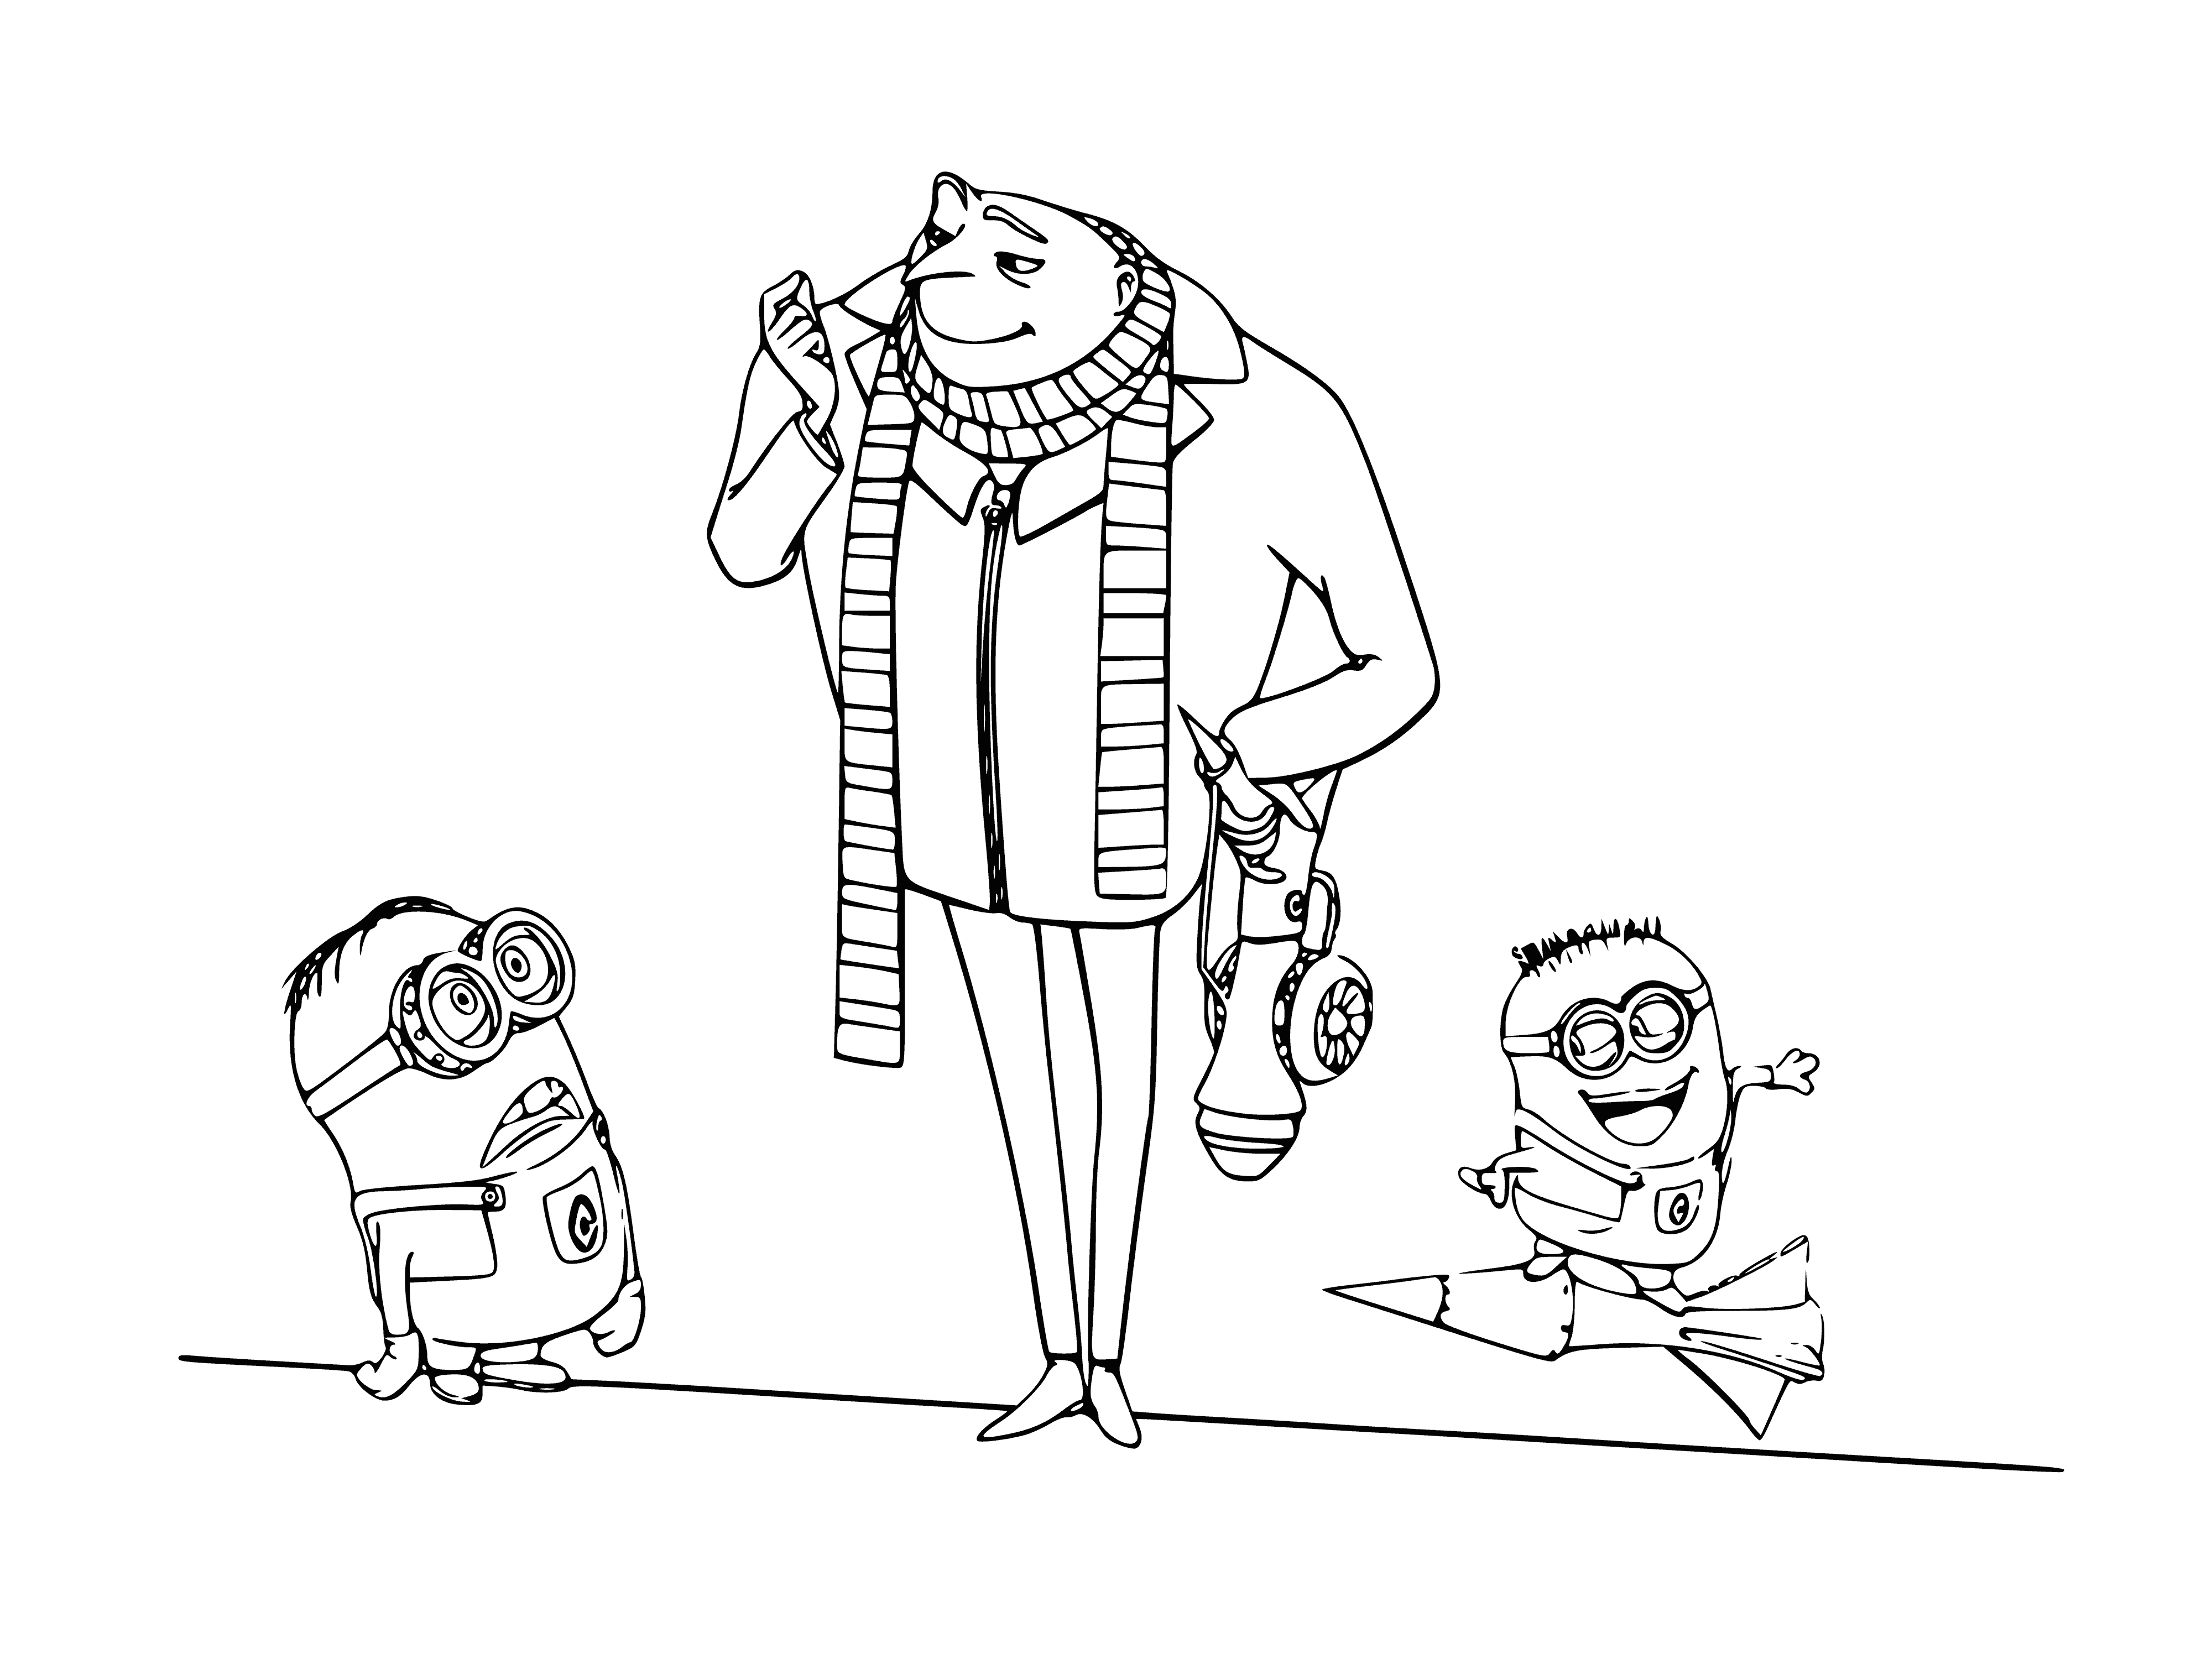 coloring page: Gru is surrounded by minions with big eyes & round heads wearing blue overalls. He's holding a remote and one minion a balloon.